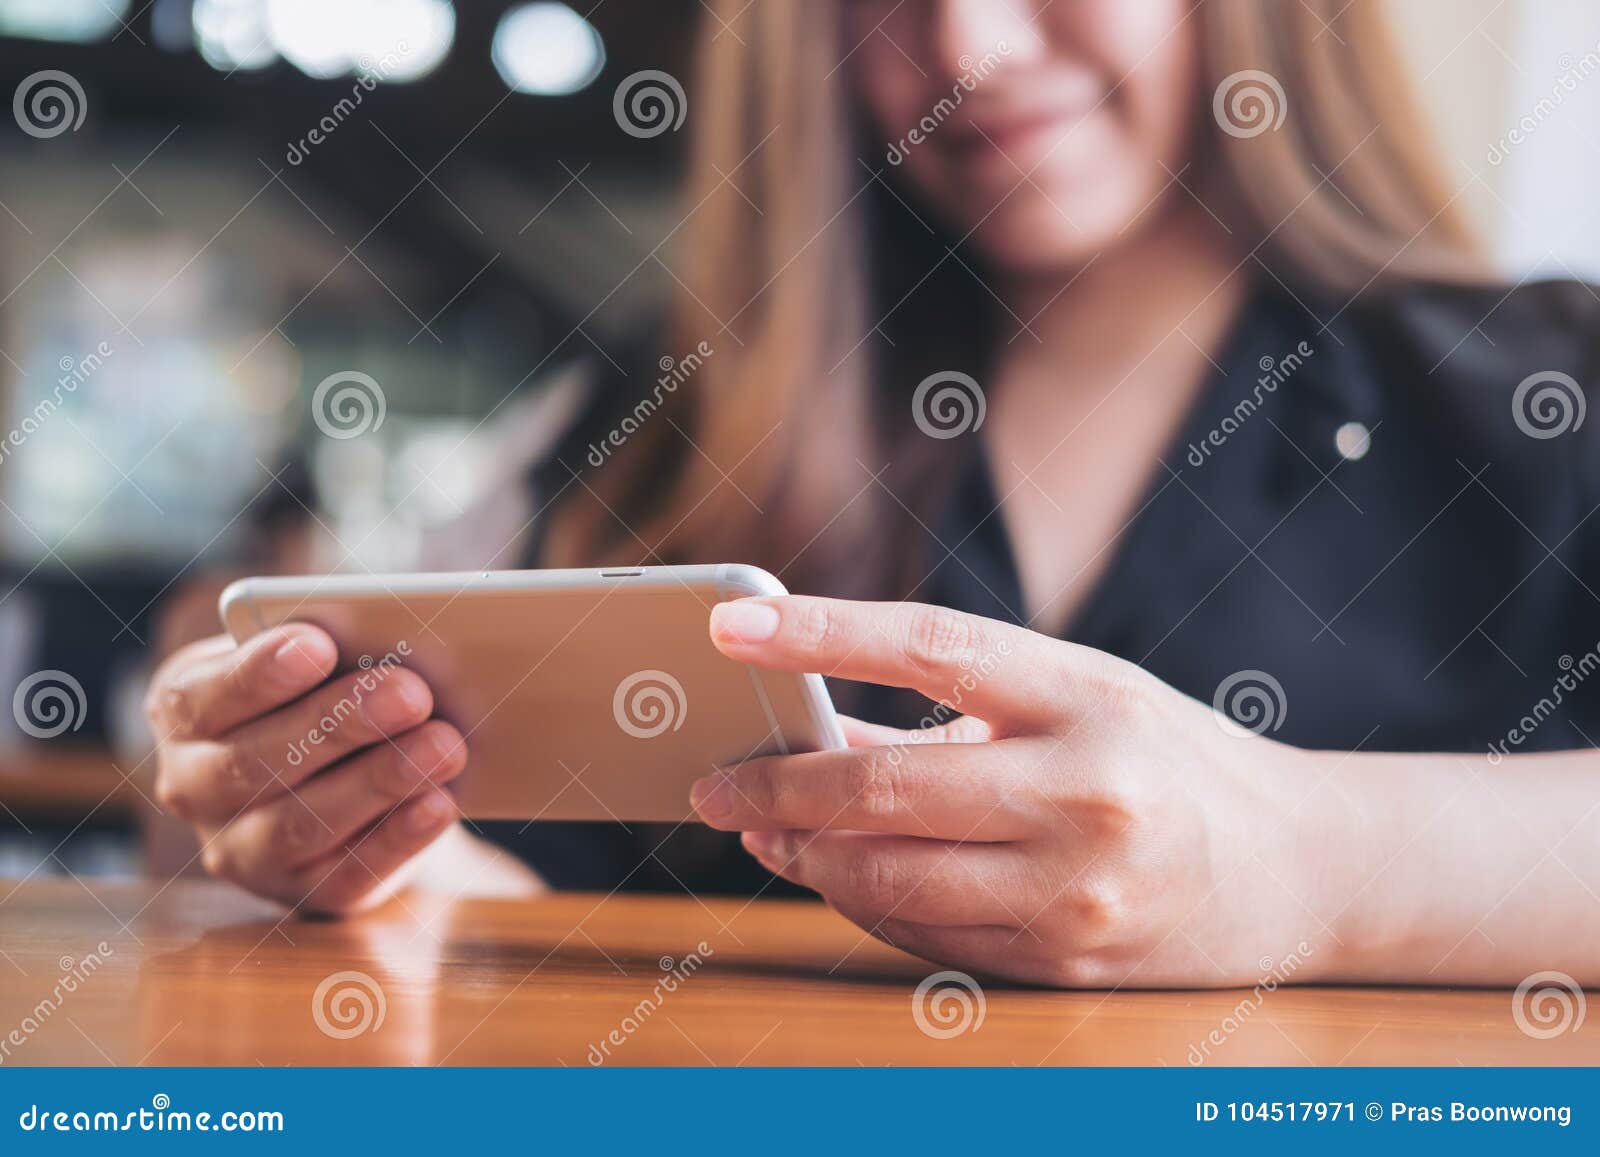 30,080 Women Playing Games Mobile Phones Images, Stock Photos & Vectors